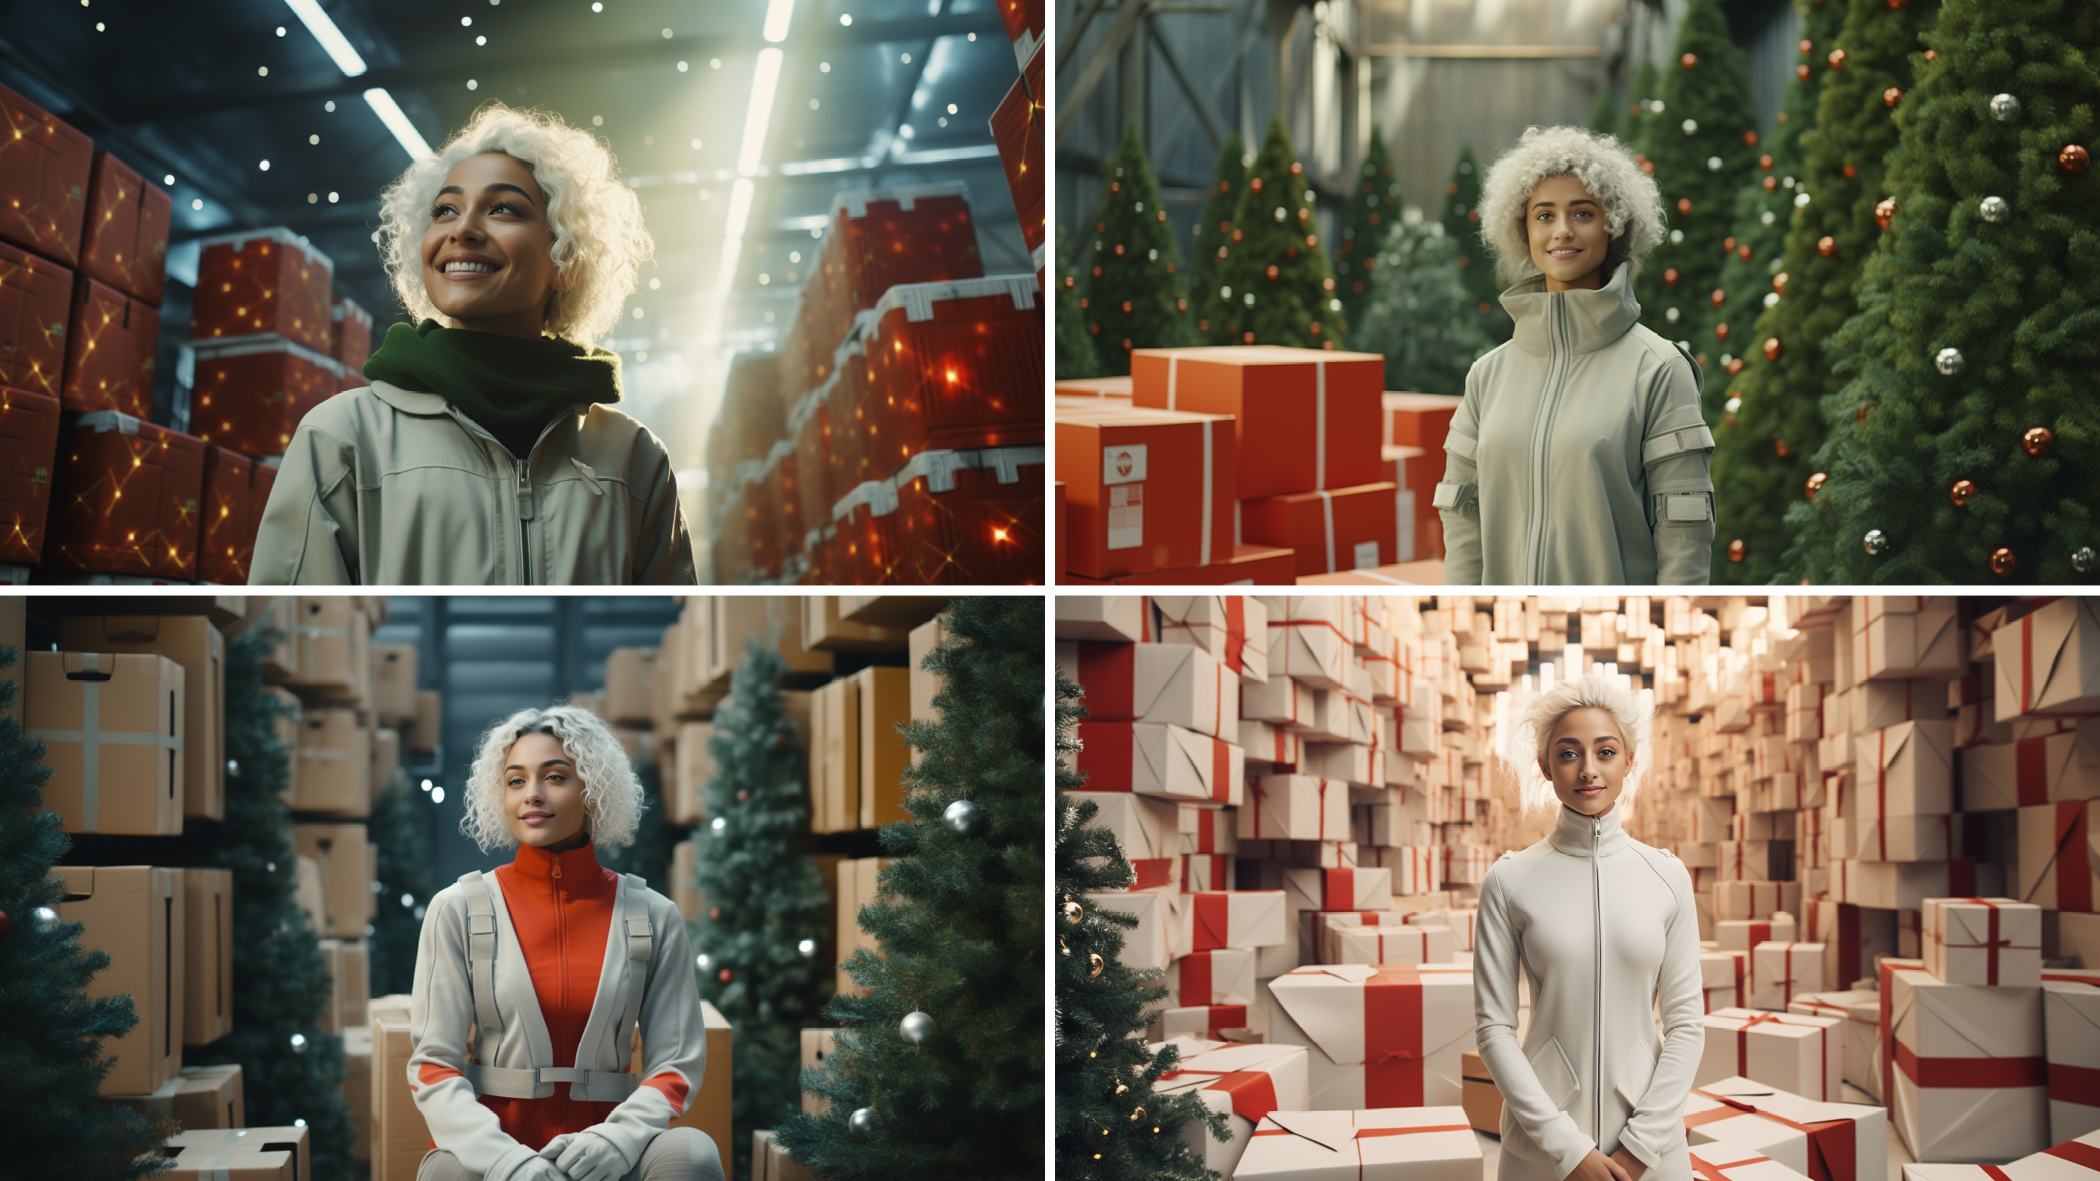 A collage of four images of the same person in various holiday-themed settings, surrounded by Christmas trees, lights, and piles of wrapped gifts, expressing cheerful emotions.